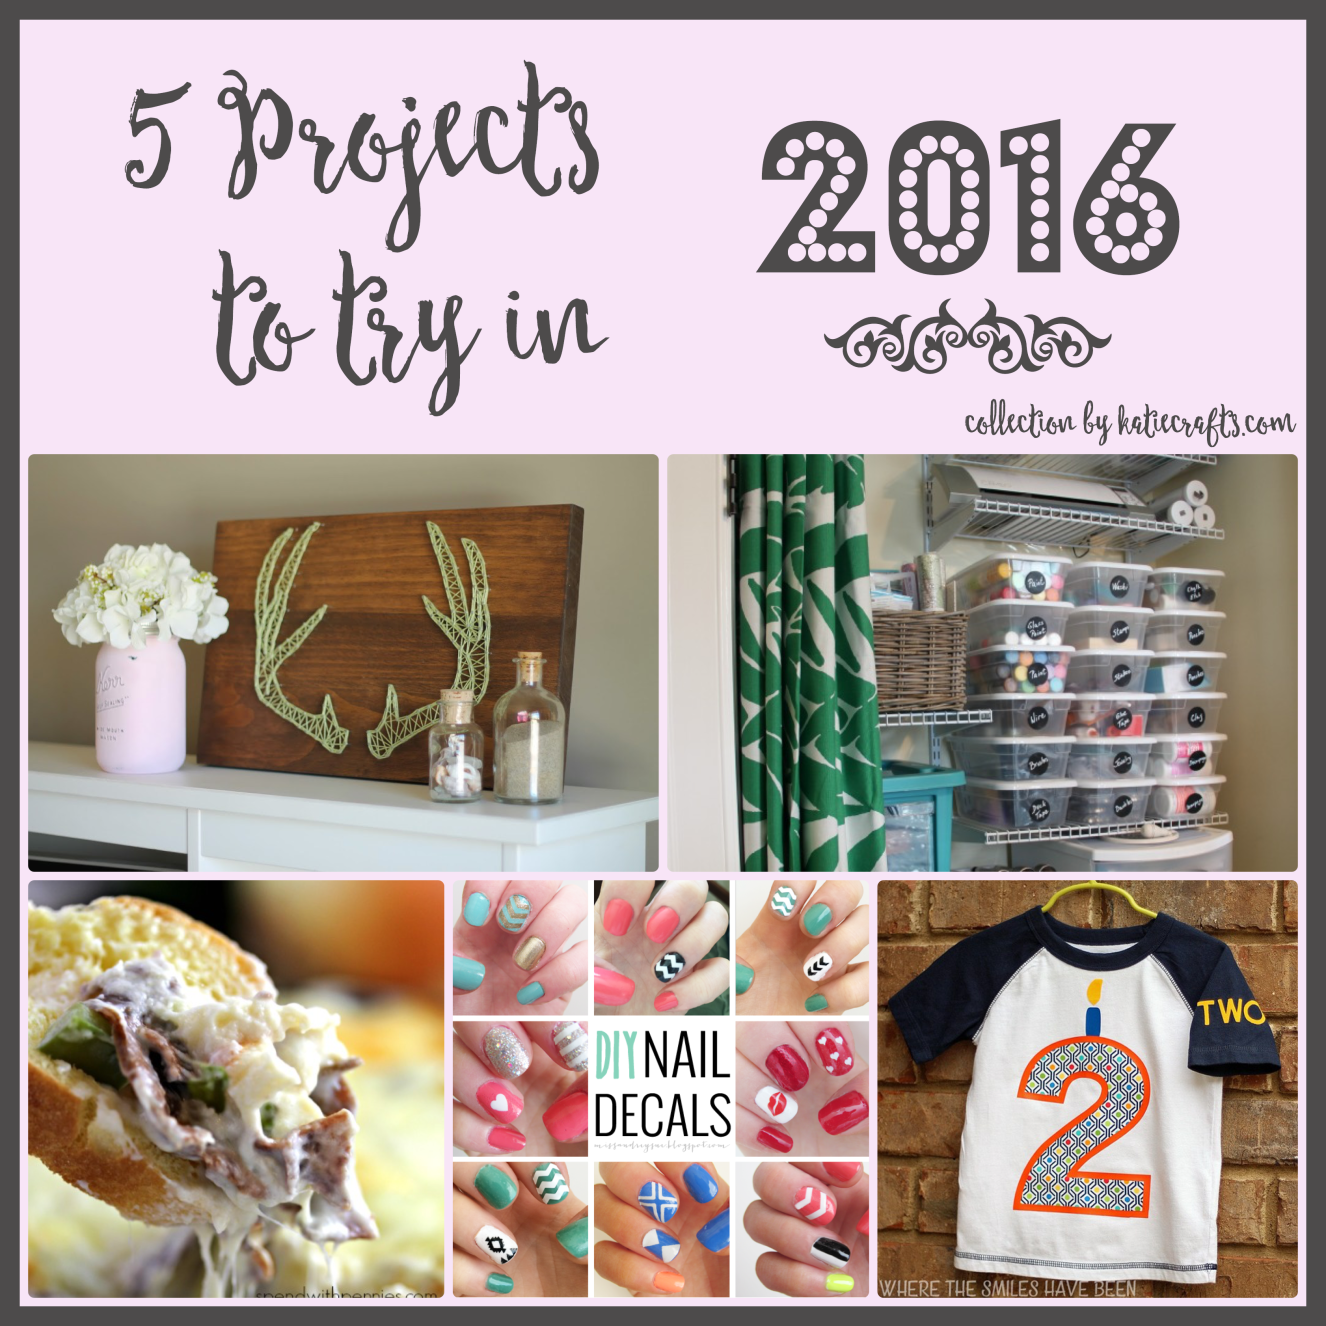 5 Projects for 2016 on Katie Crafts; https://www.katiecrafts.com